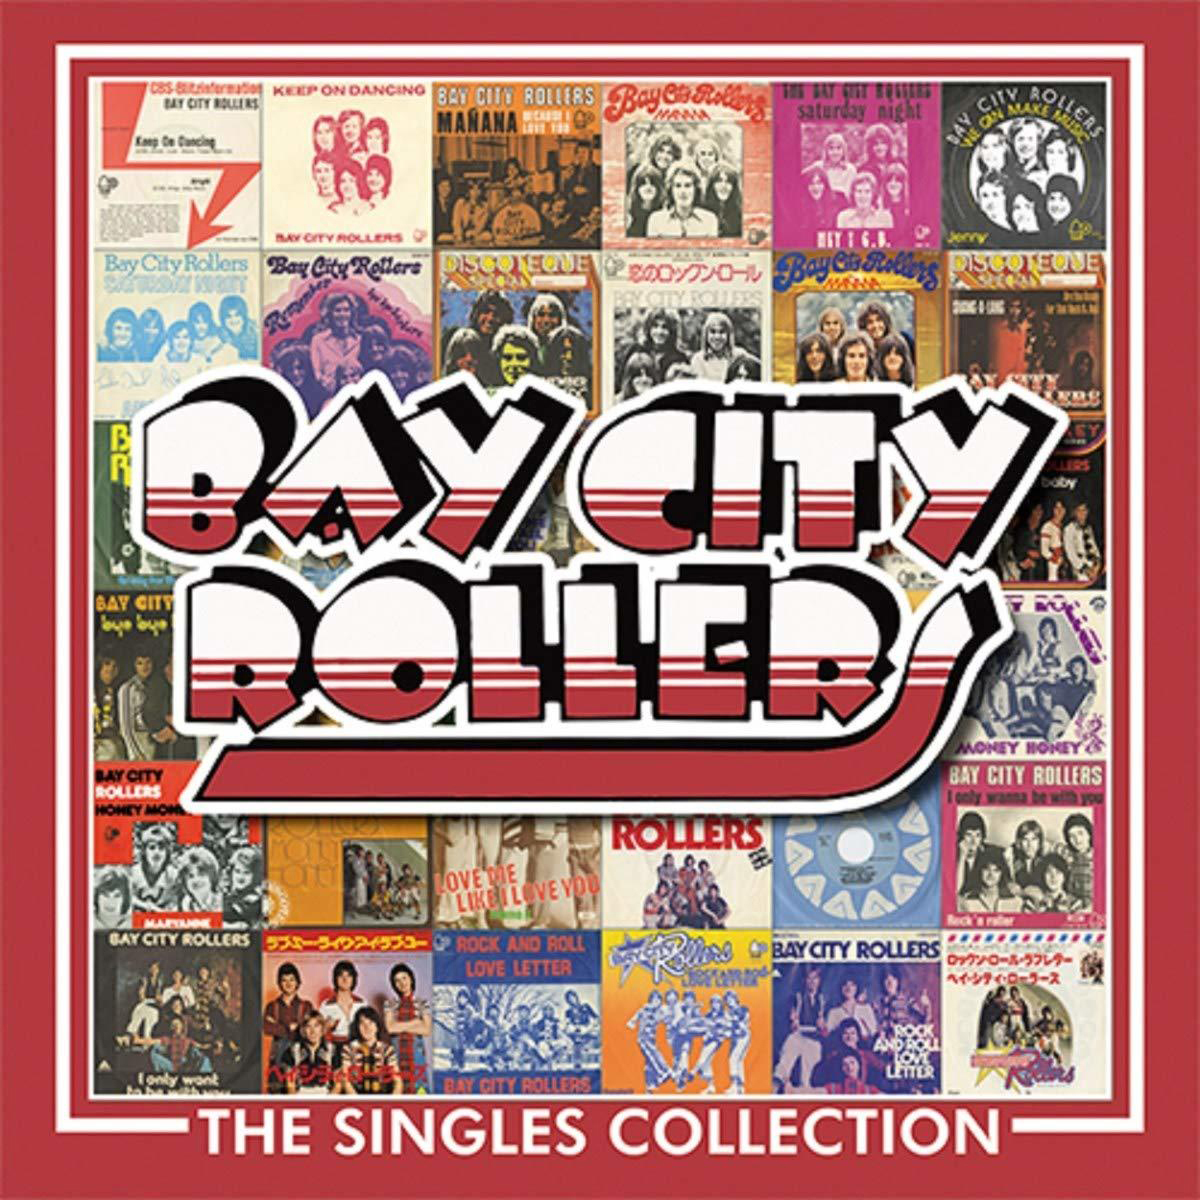 Rollers Bay Set) Box Singles Collection (CD) - (3CD City - The